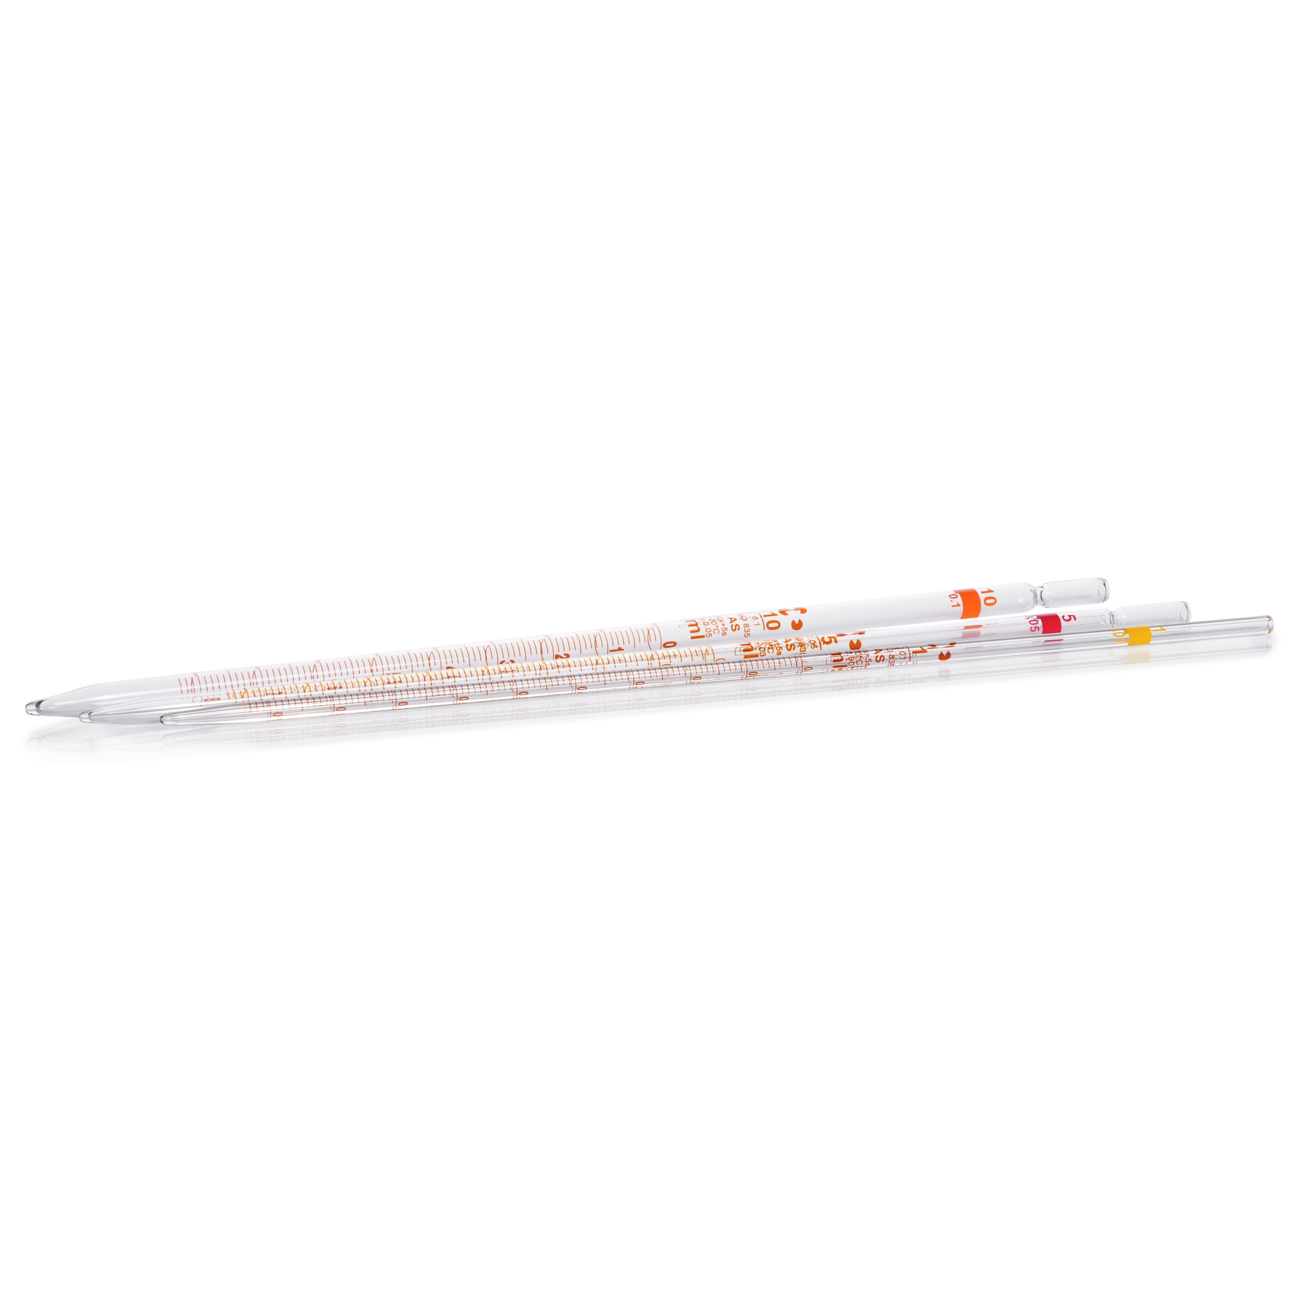 ABML 15211969 Graduated pipette class AS - 1ml